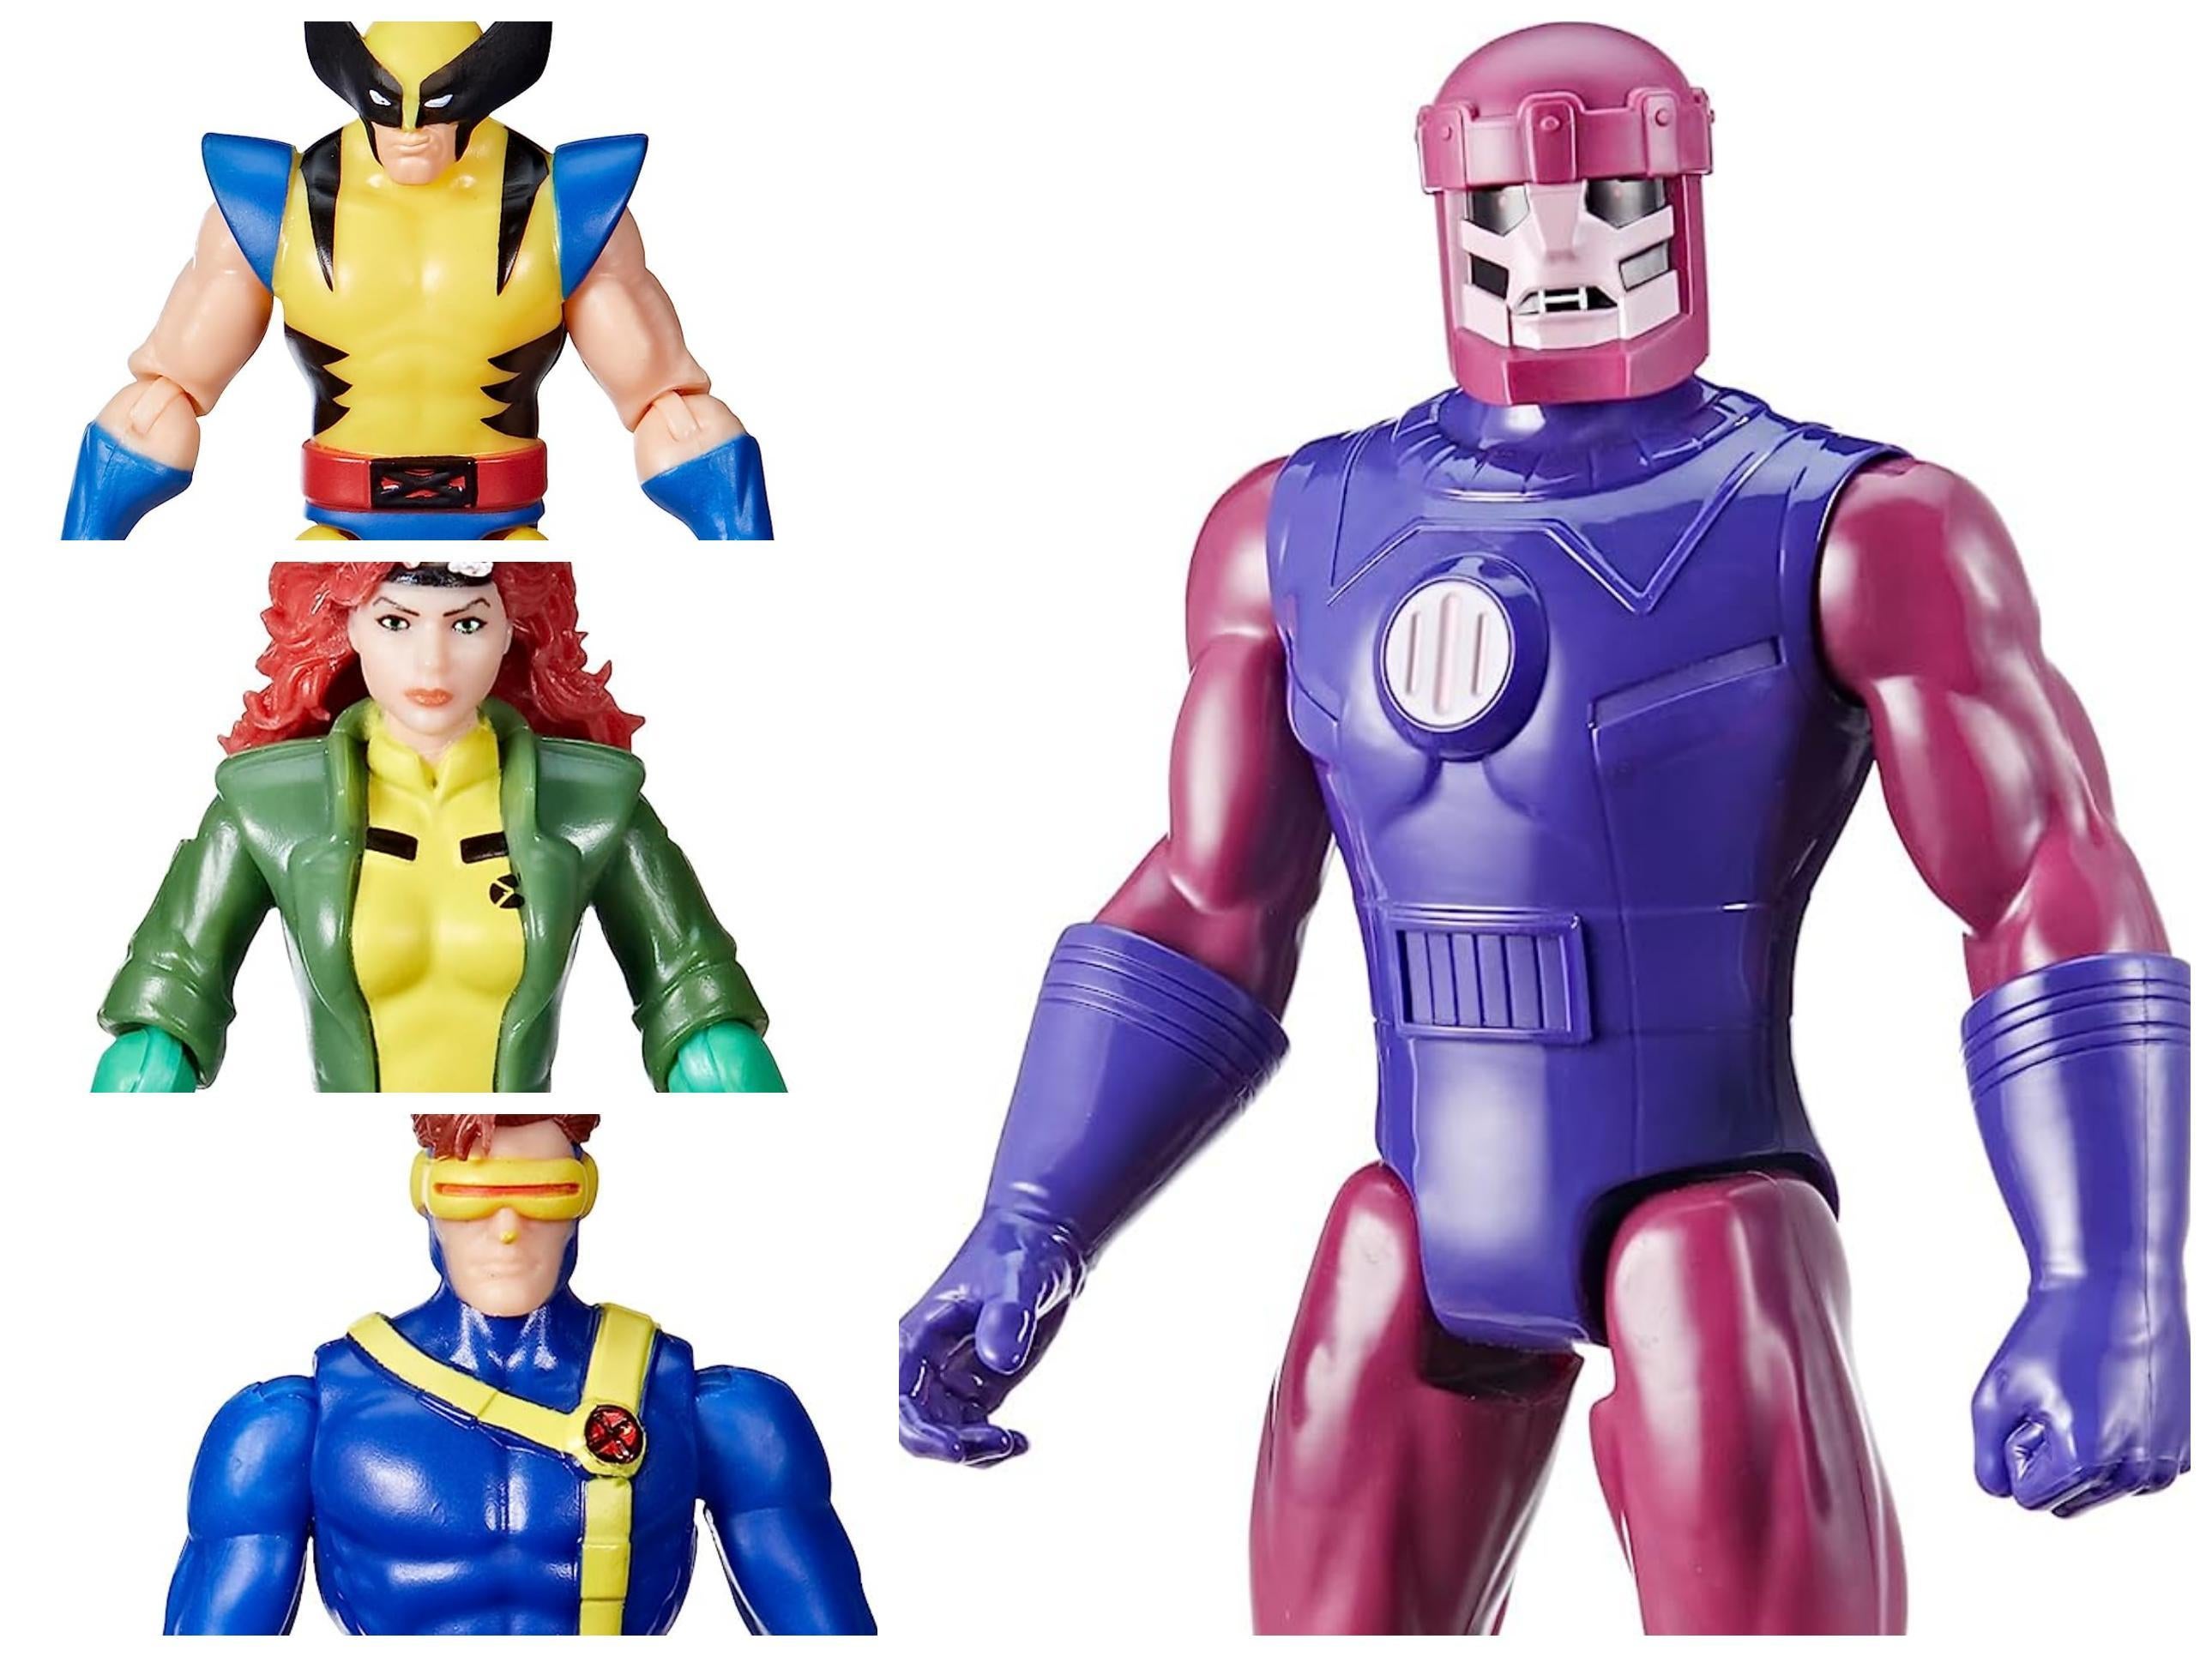 X-Men '97 Epic Hero Series Lineup Includes An Affordable 14-Inch